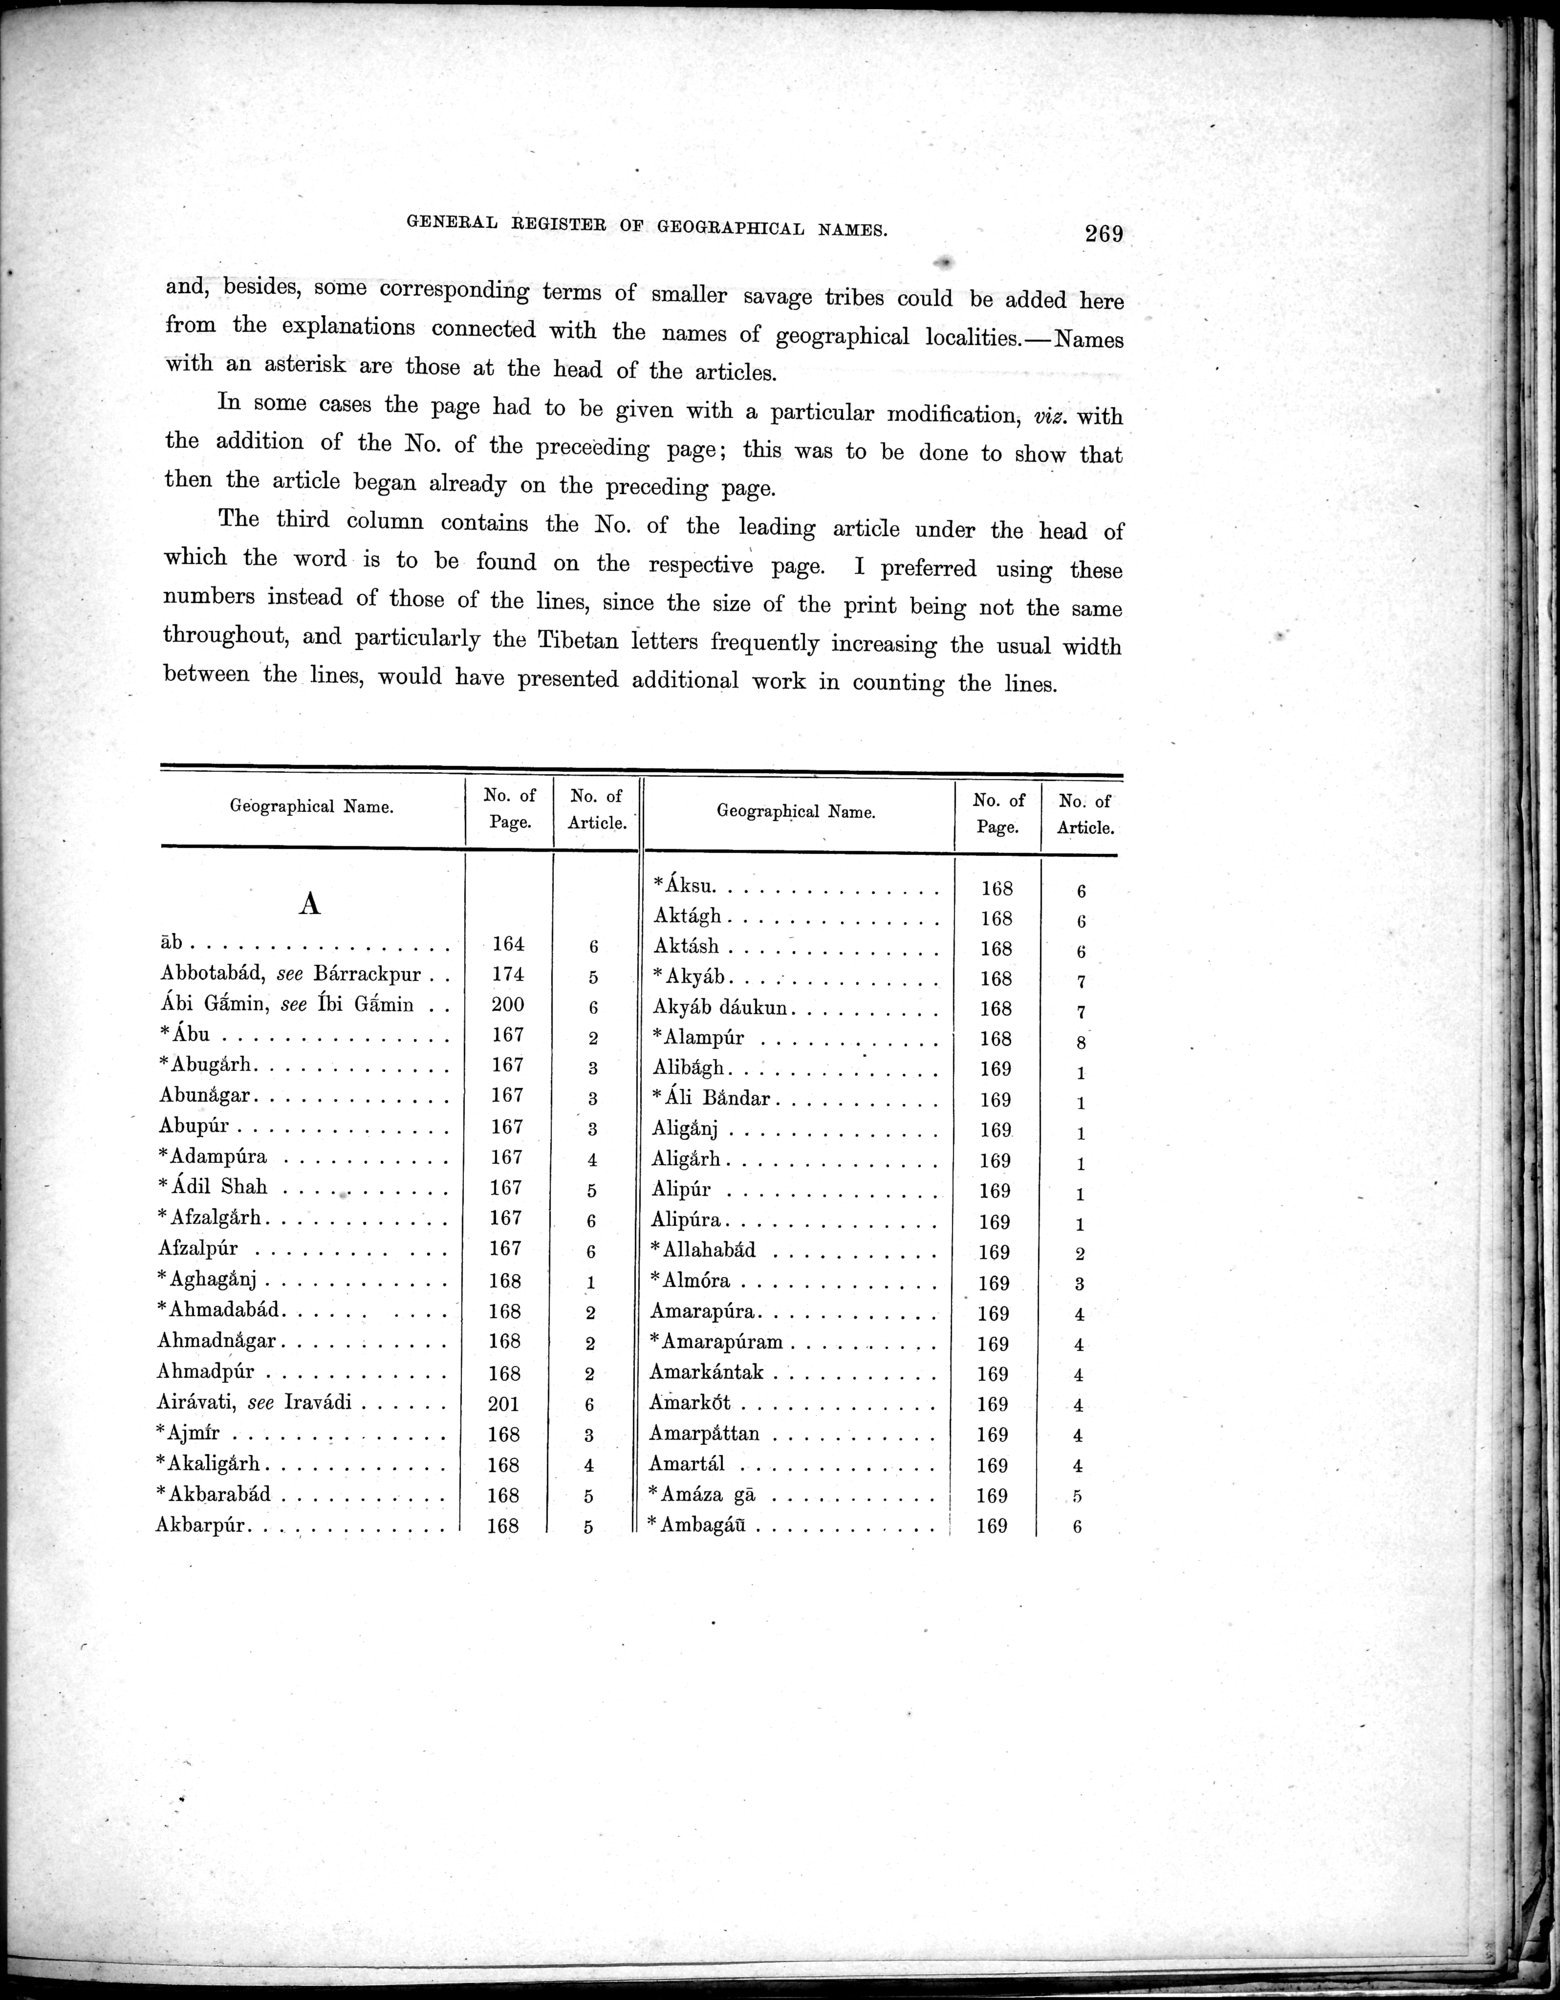 Results of a Scientific Mission to India and High Asia : vol.3 / Page 301 (Grayscale High Resolution Image)